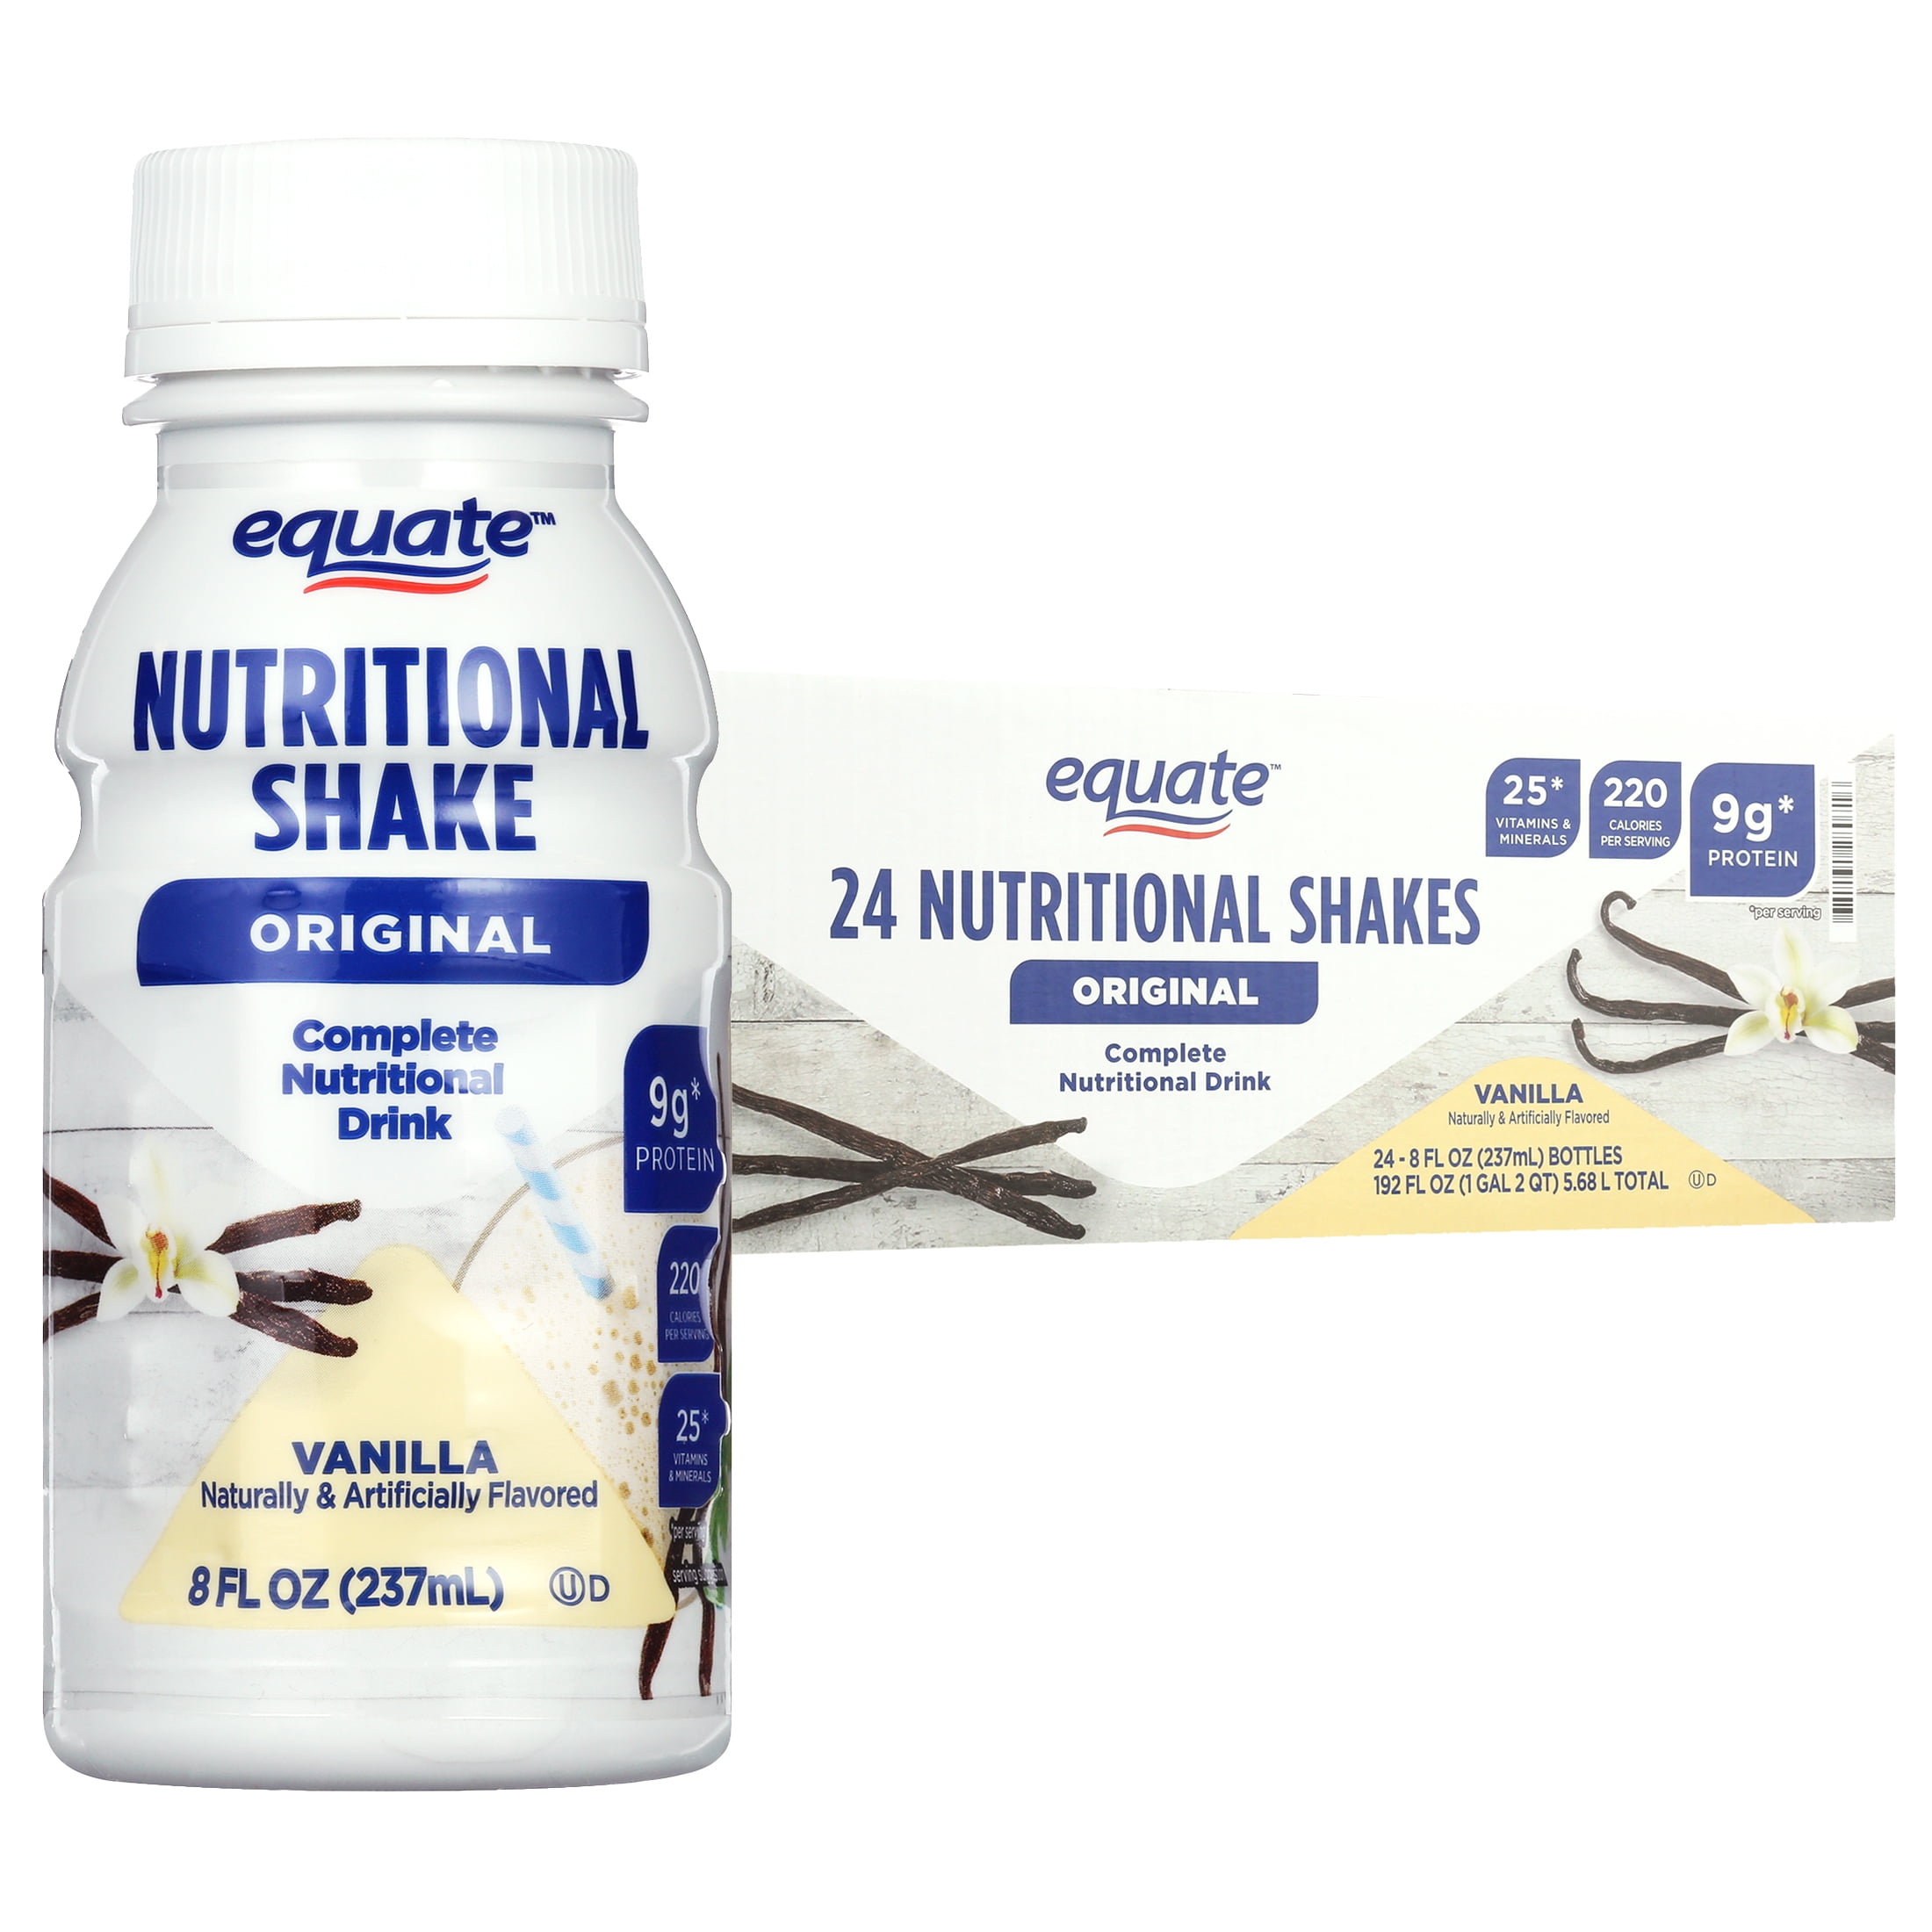 Equate Original Meal Replacement Nutritional Shakes, Vanilla, 8 fl oz, 24 Count